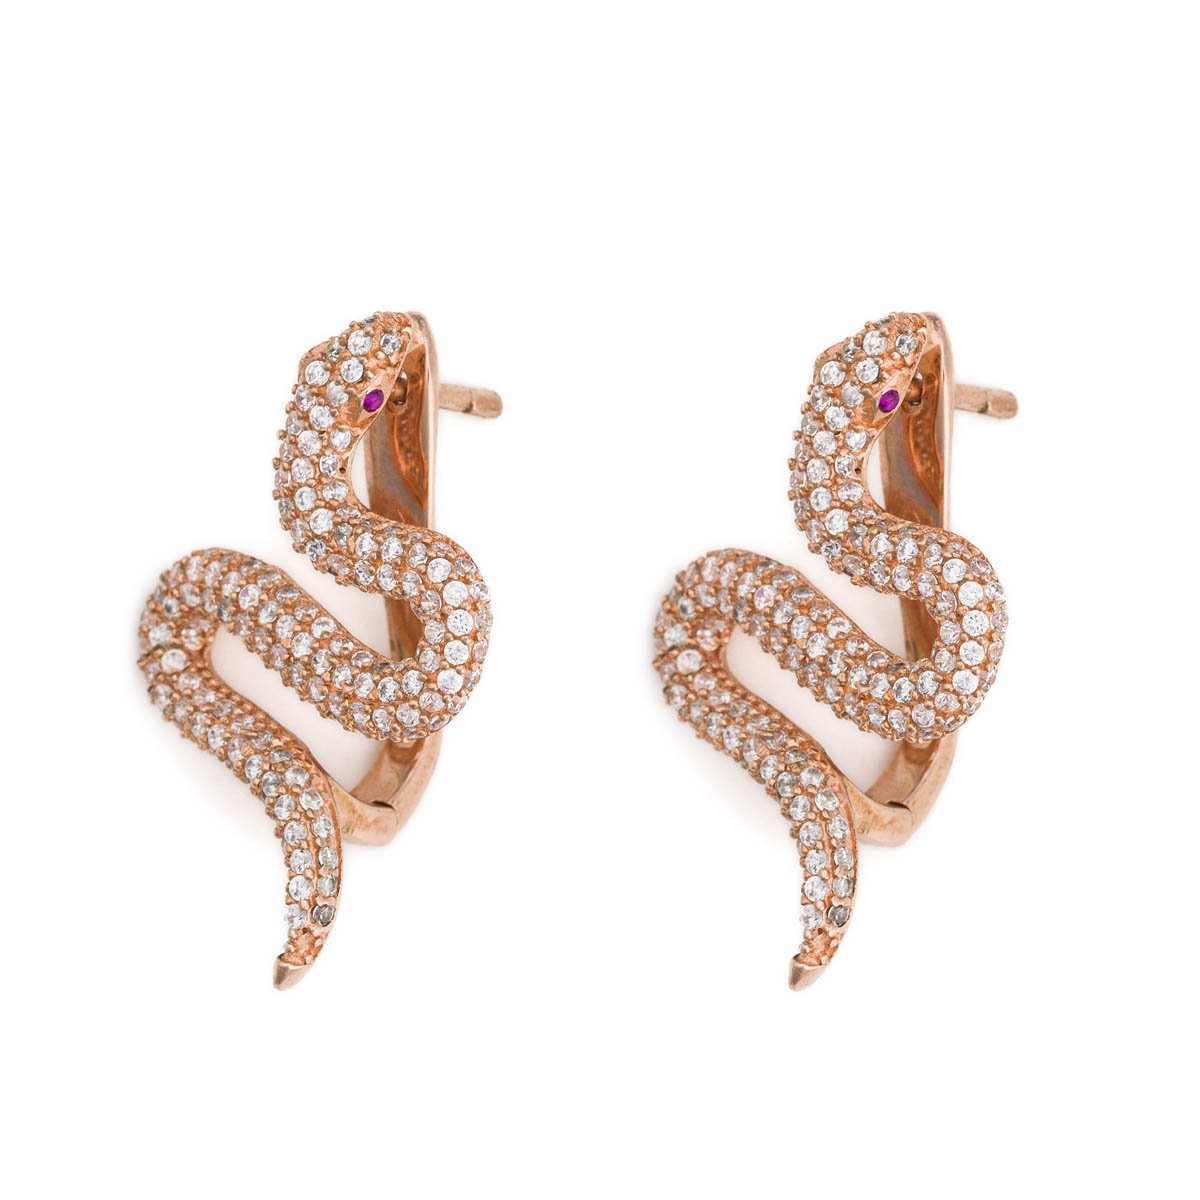 Snake Stud Earrings with zircons - Rose Gold Plated